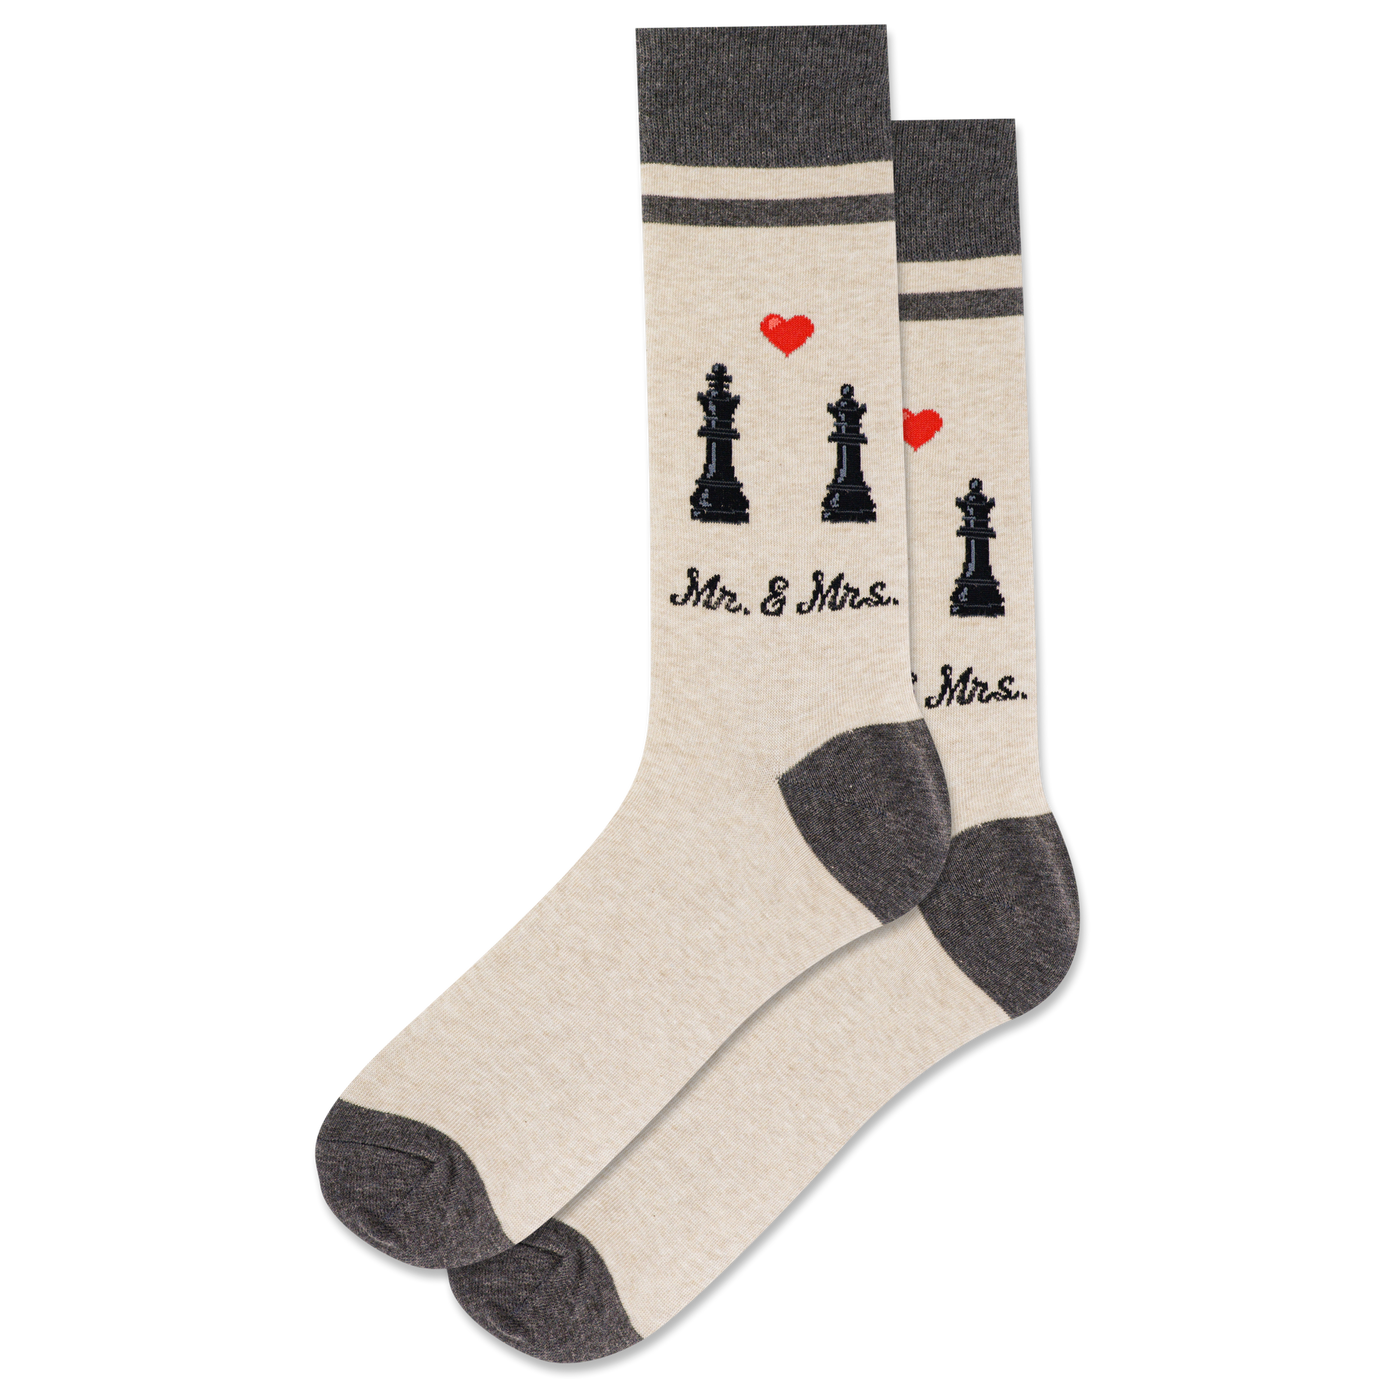 "Mr & Mrs" Crew Socks by Hot Sox - Large